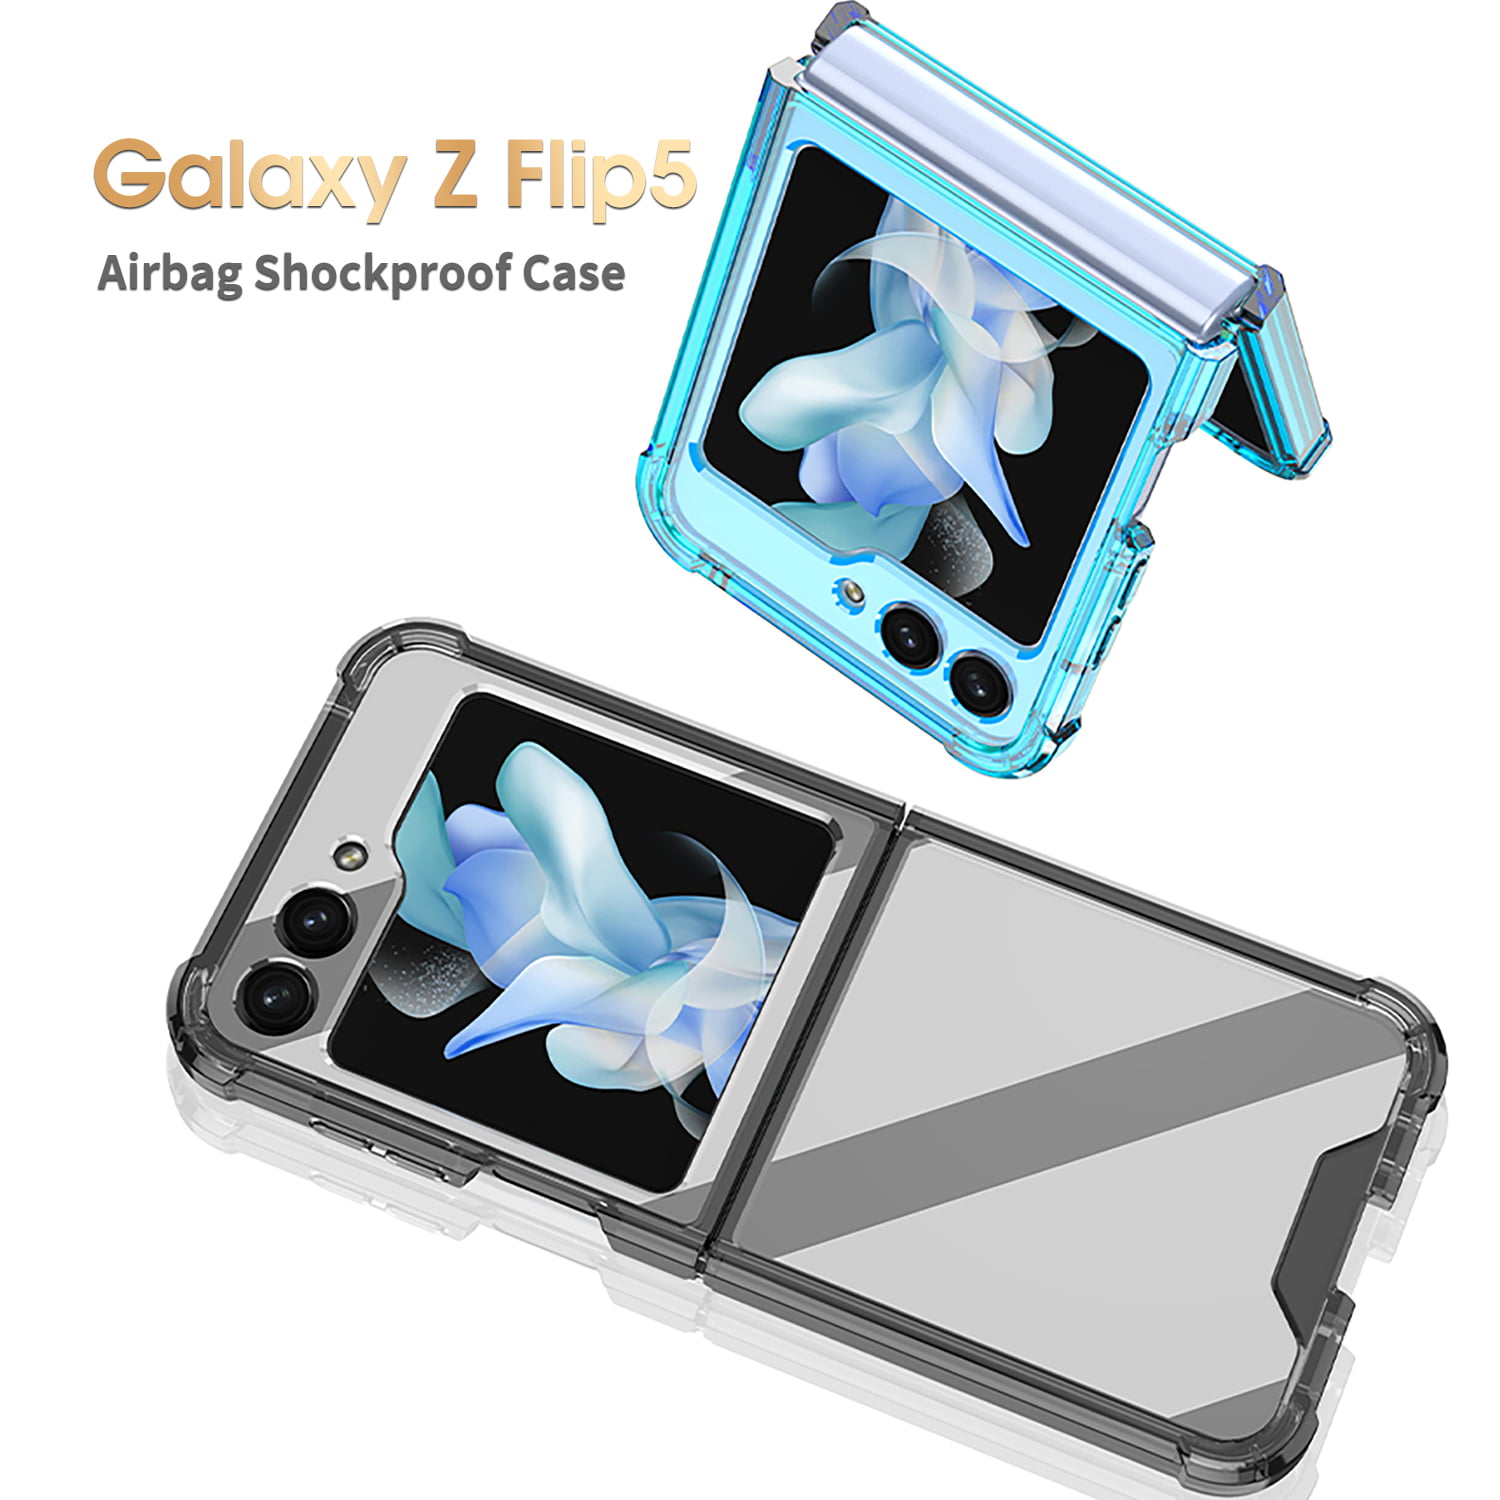 elago Compatible with Samsung Galaxy Z Flip 5 Case - Clear Case, Hard PC Cover , Anti-Yellowing, Crystal Clear, Shockproof Bumper Cover, Full Body